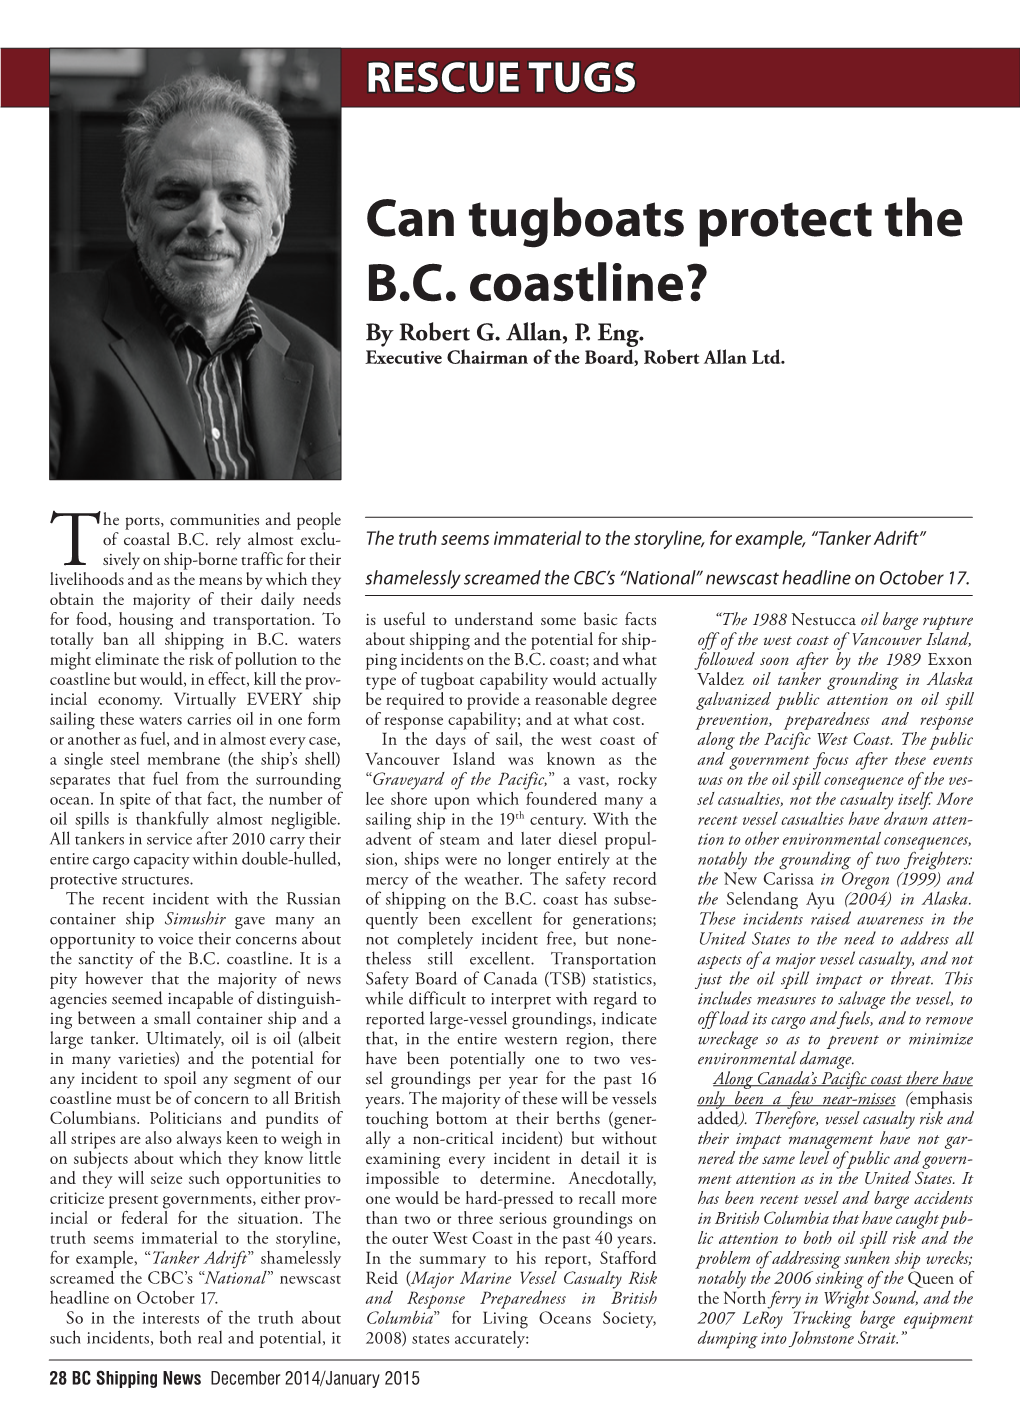 Can Tugboats Protect the B.C. Coastline? by Robert G